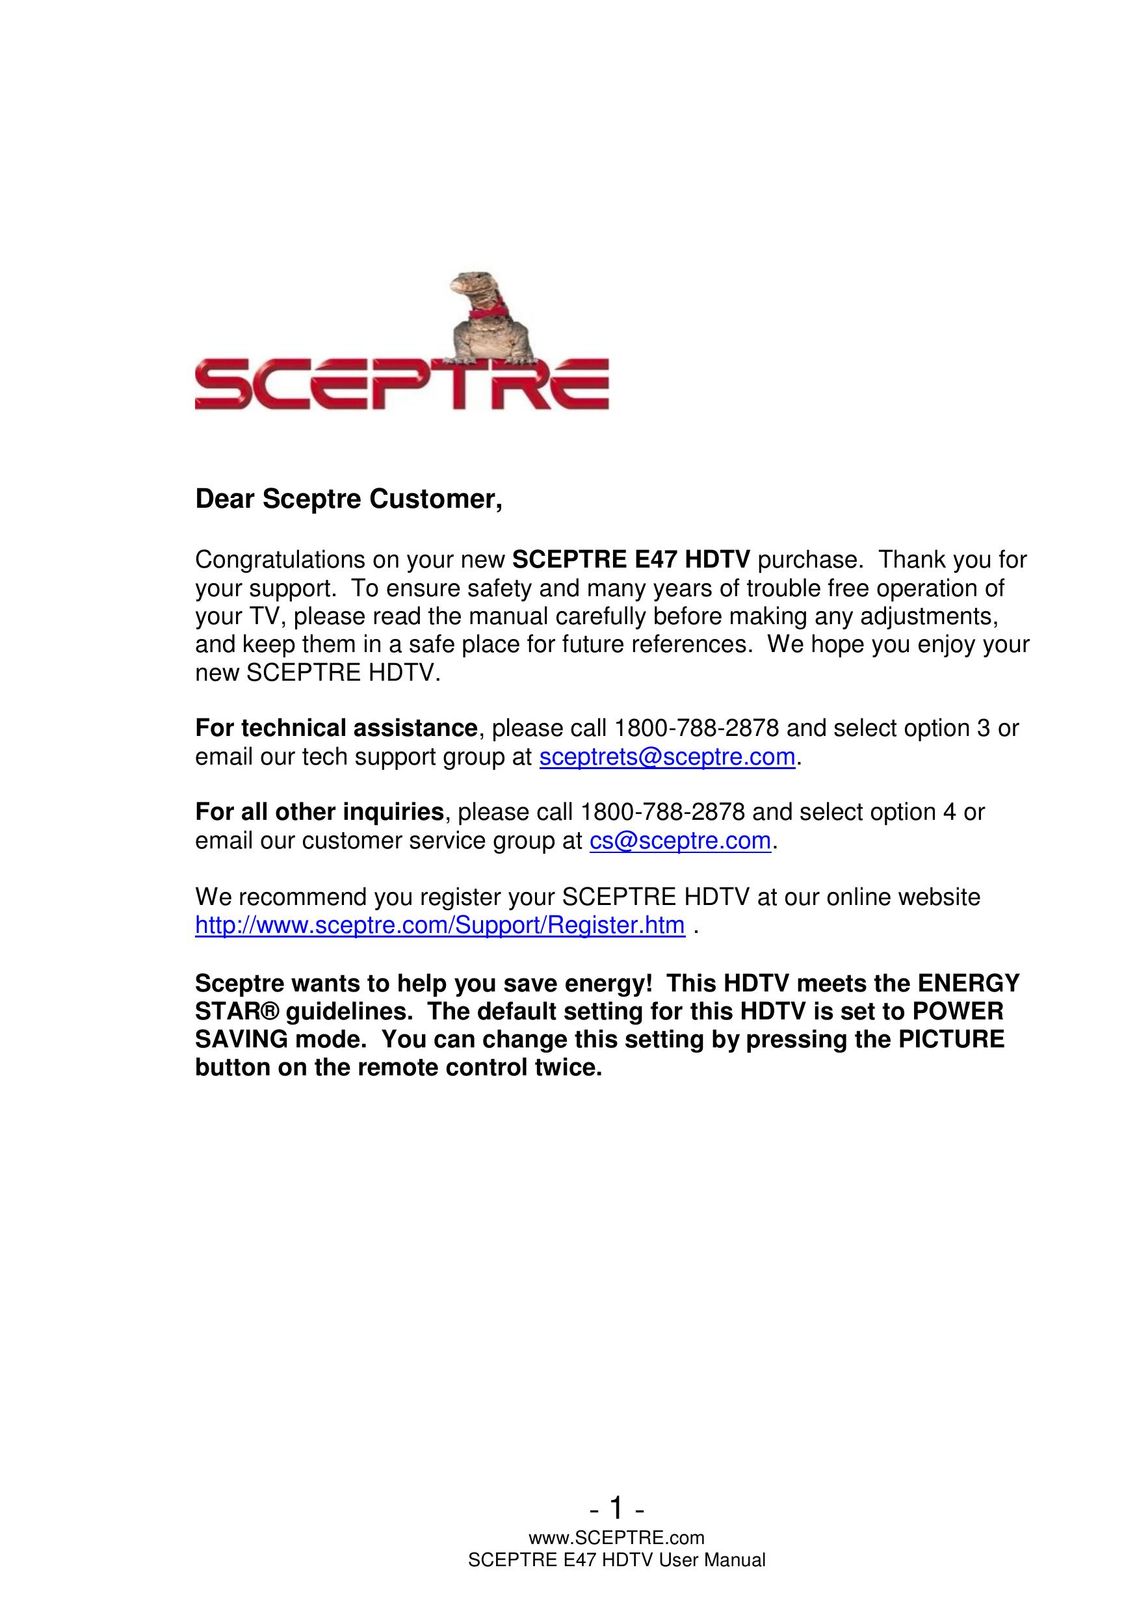 Sceptre Technologies HDTV Projection Television User Manual